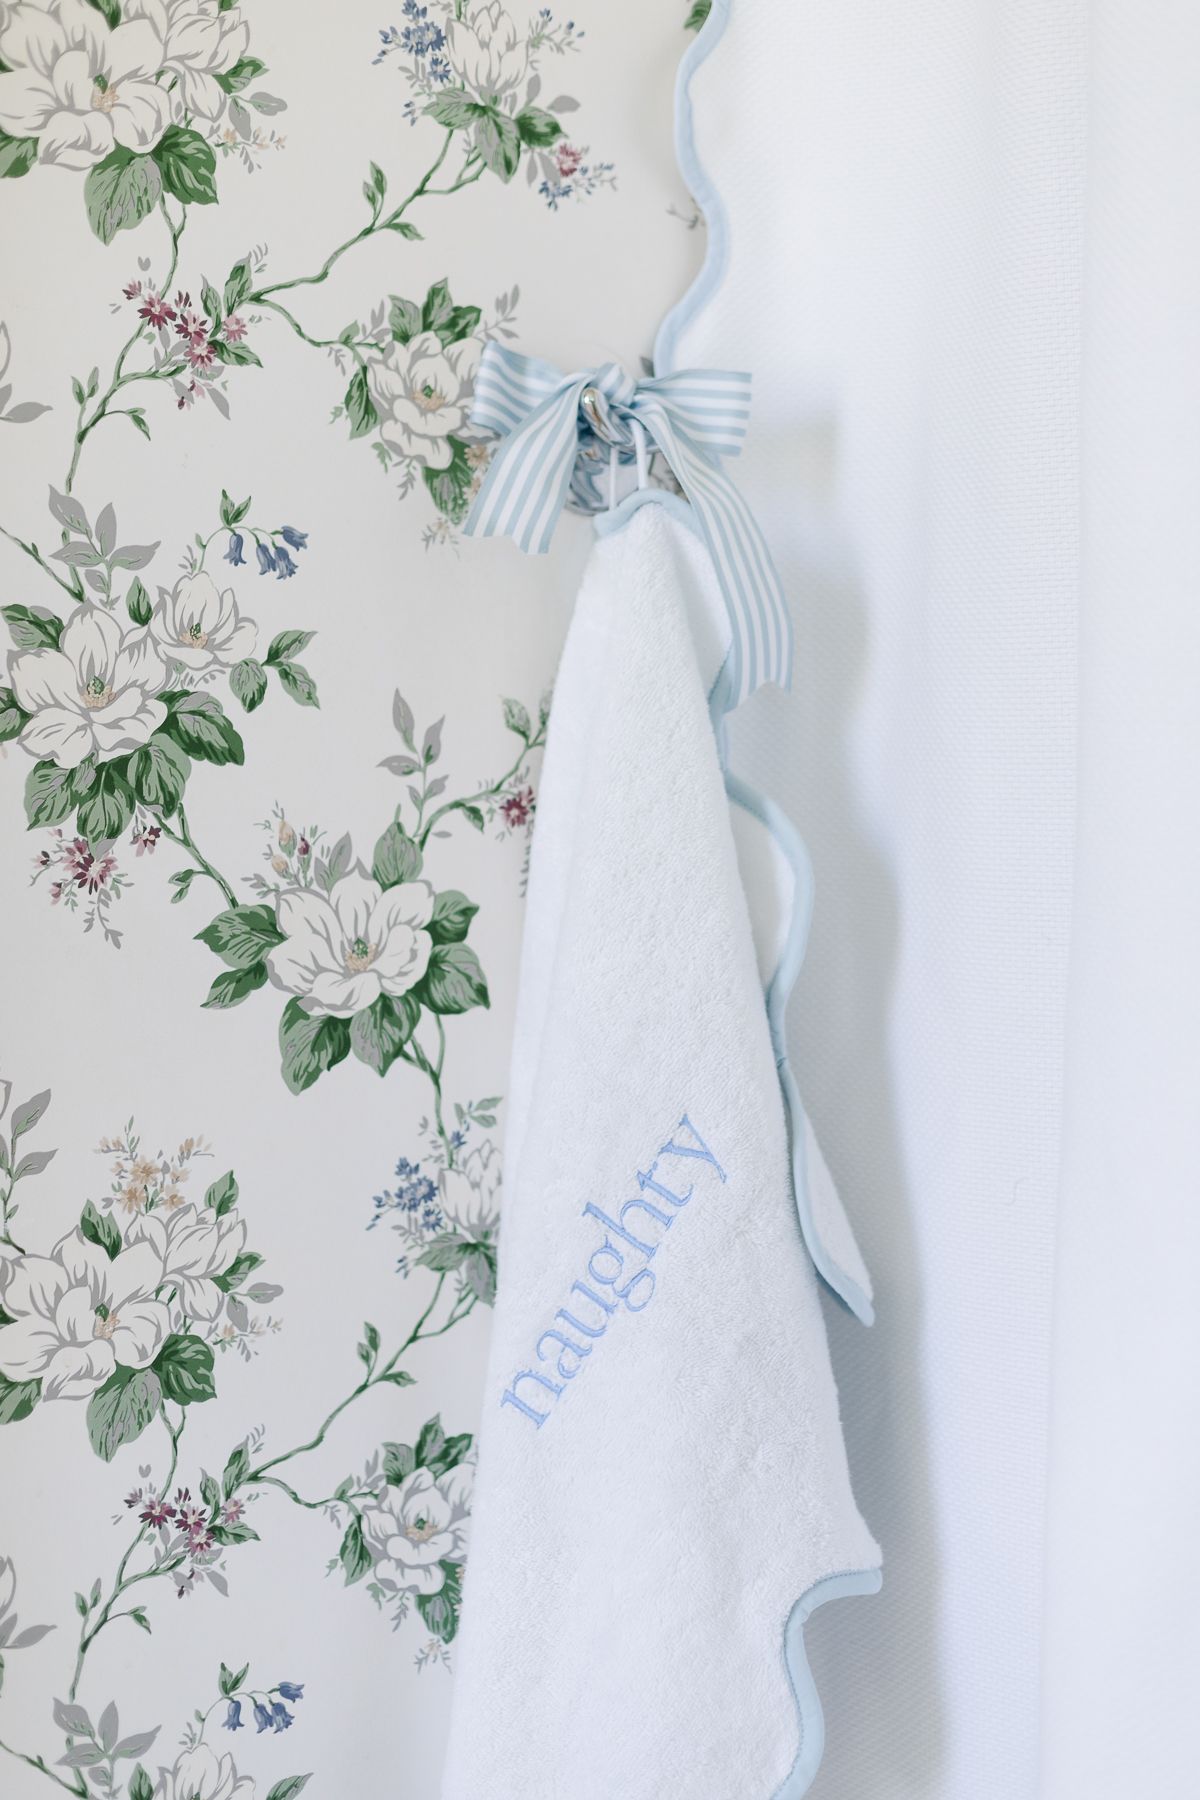 A blue and white towel that is embroidered with the word "naughty" in a floral wallpapered bathroom.